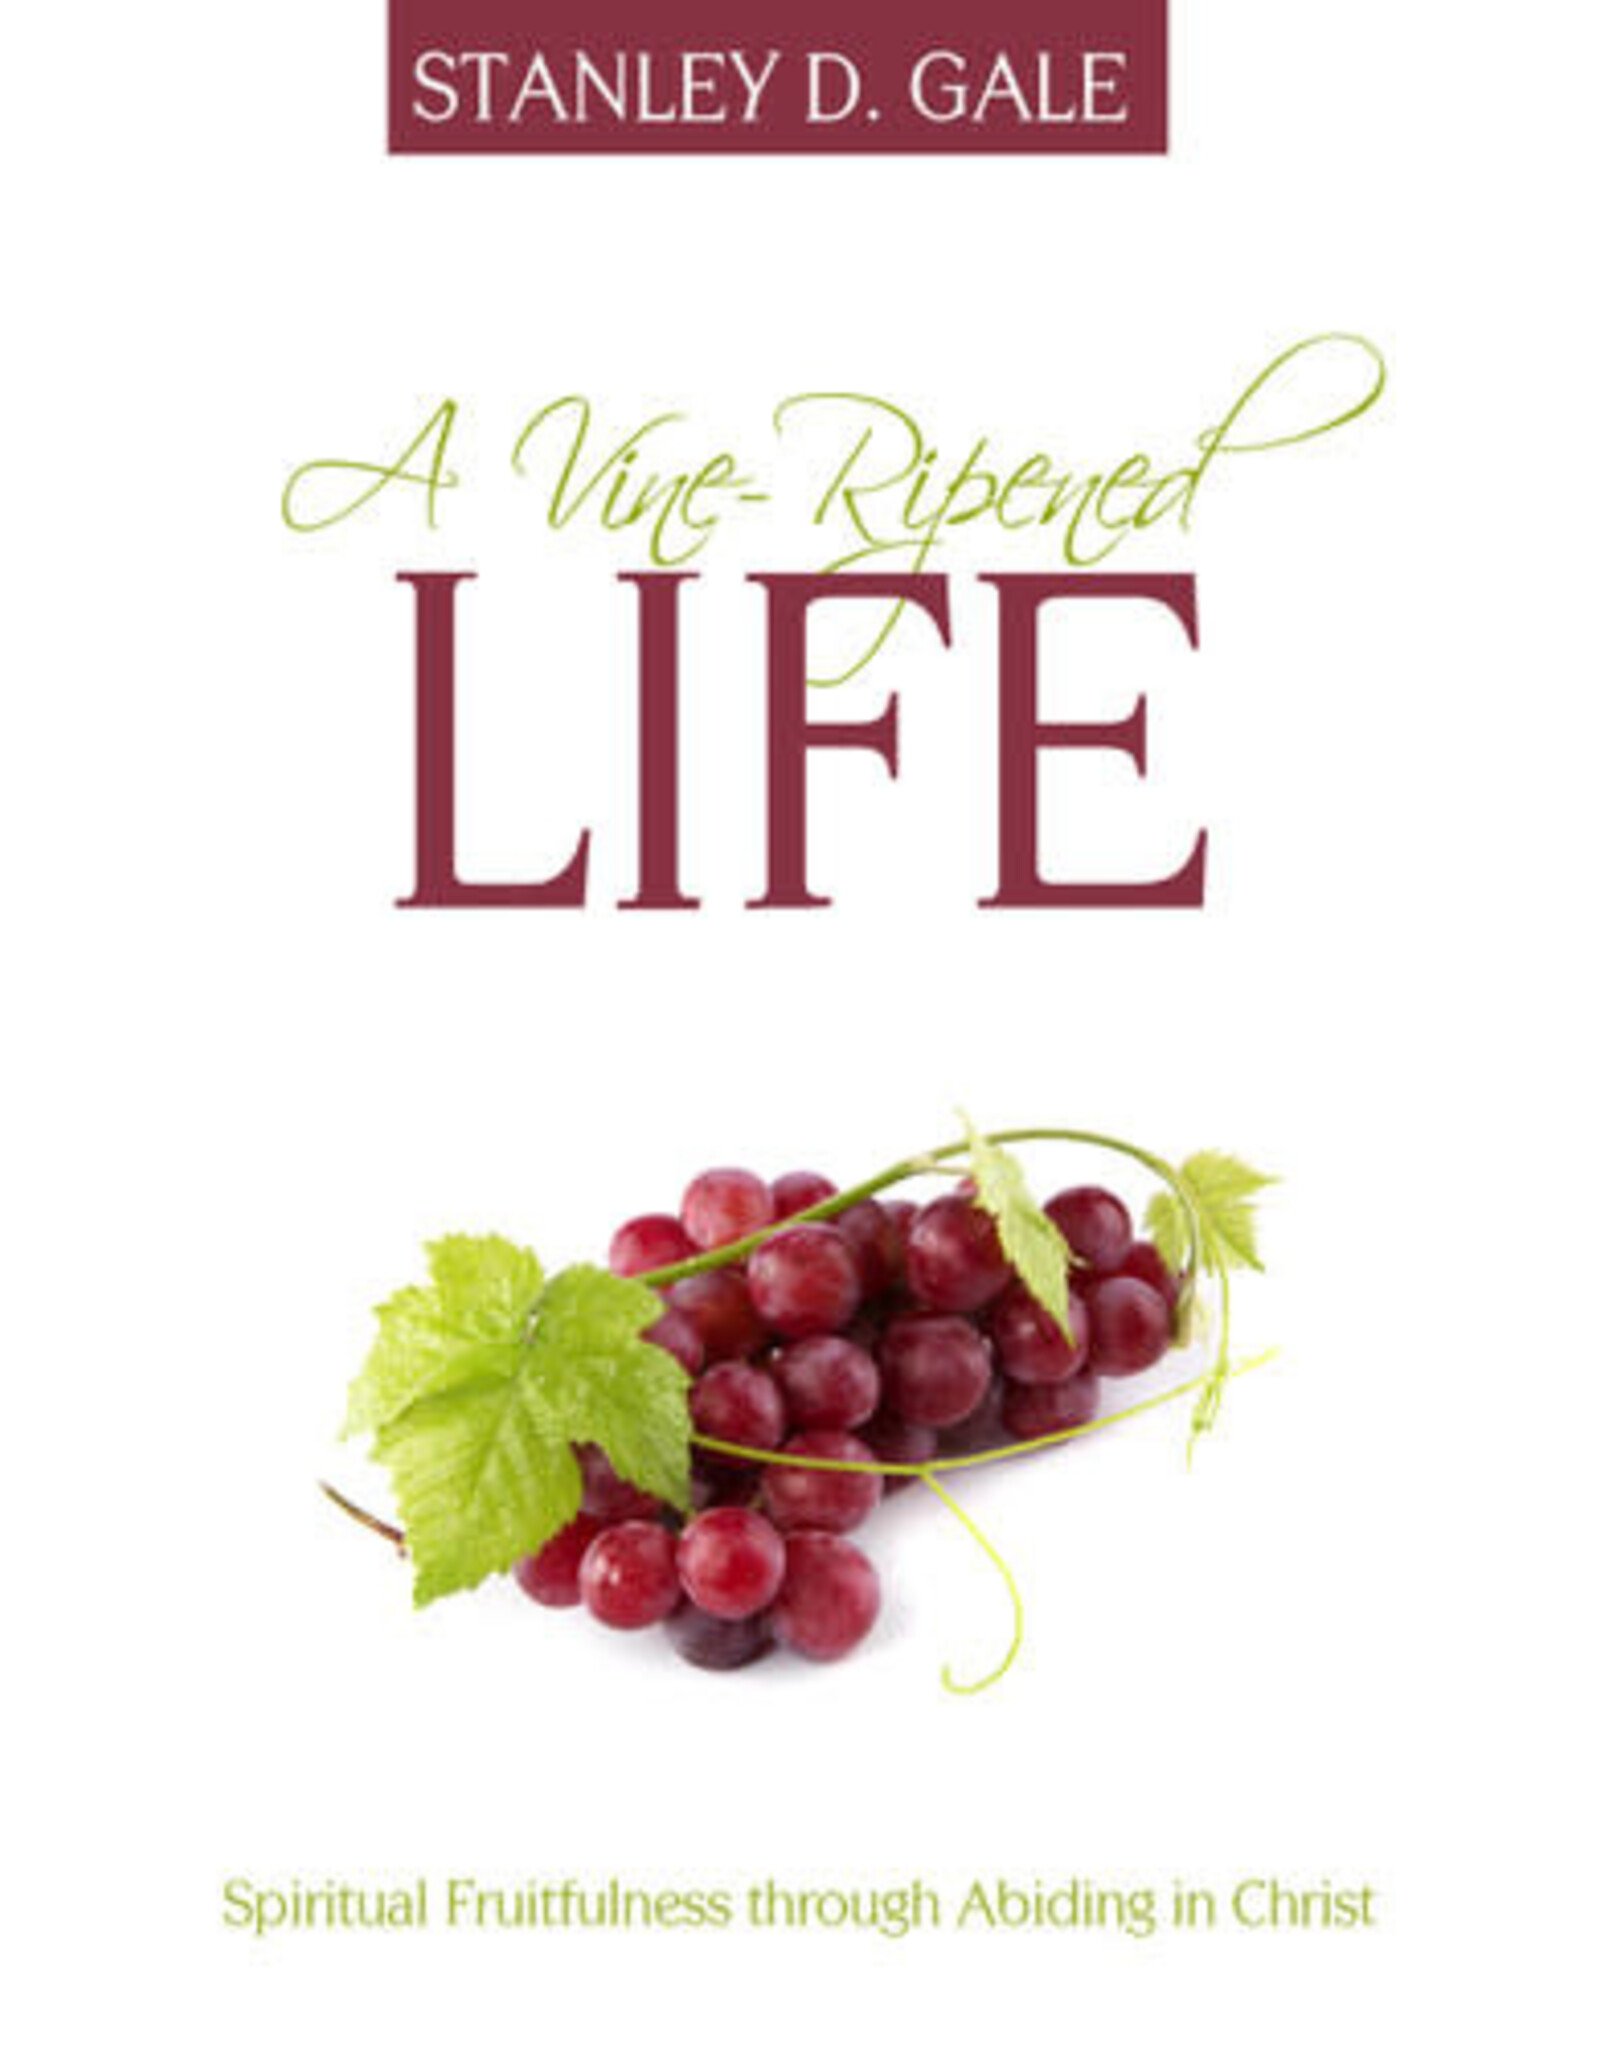 Stanley D Gale A Vine-Ripened Life:  Spiritual Fruitfulness through Abiding in Christ